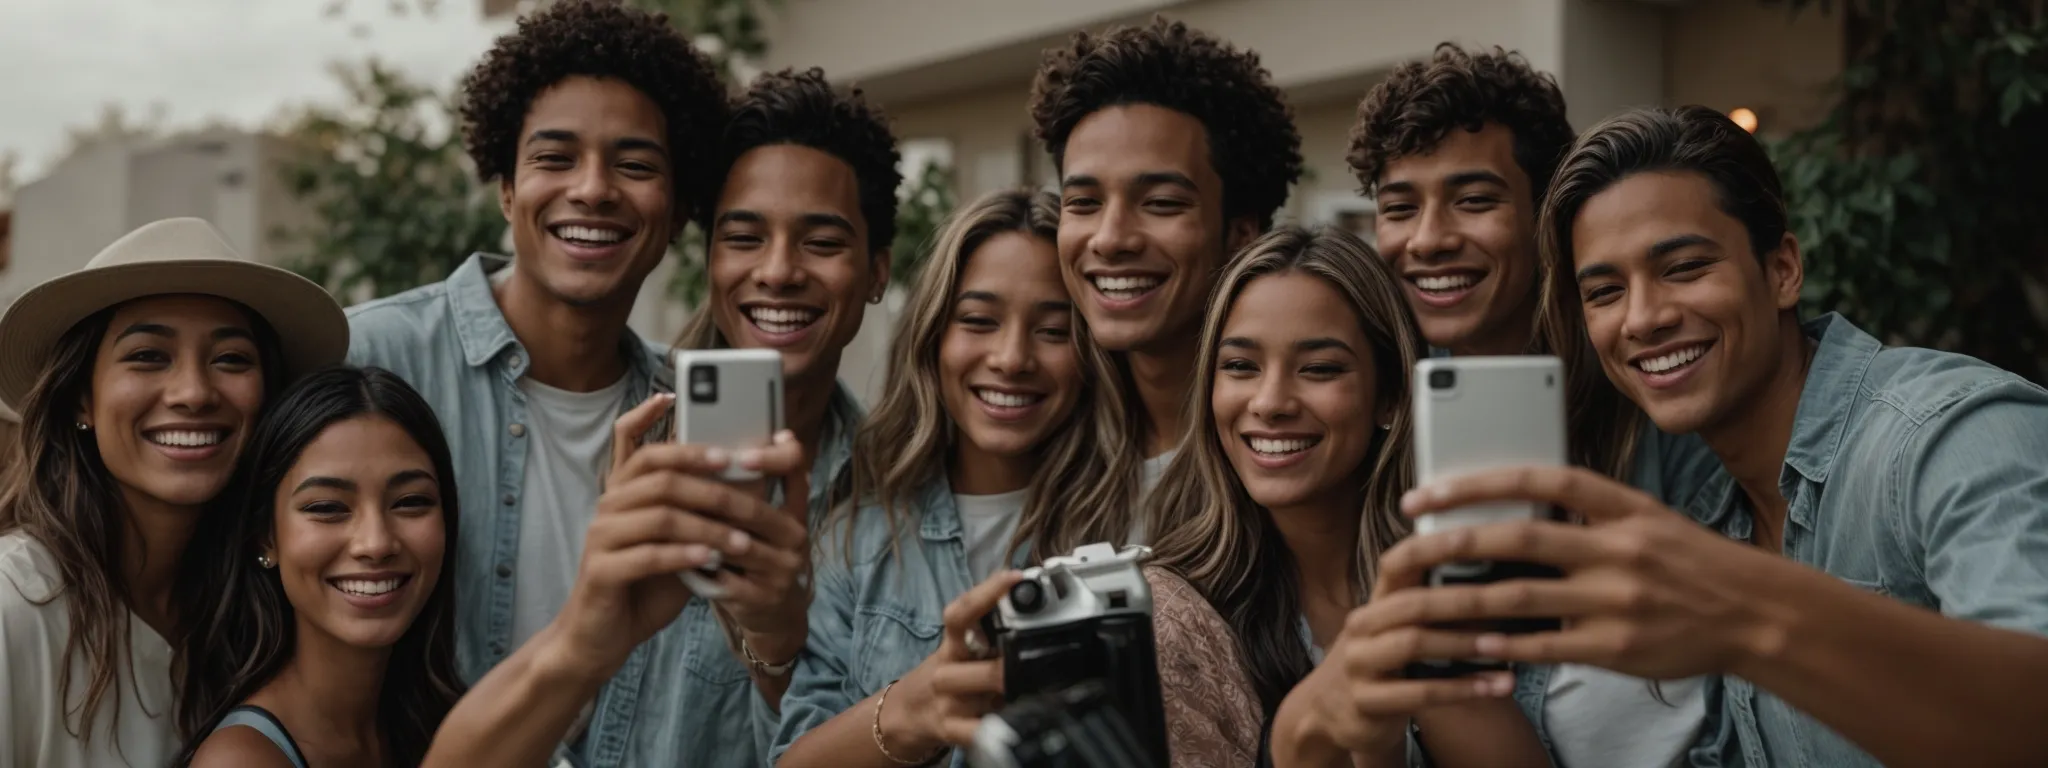 a group of happy people holding a product while taking a selfie together.